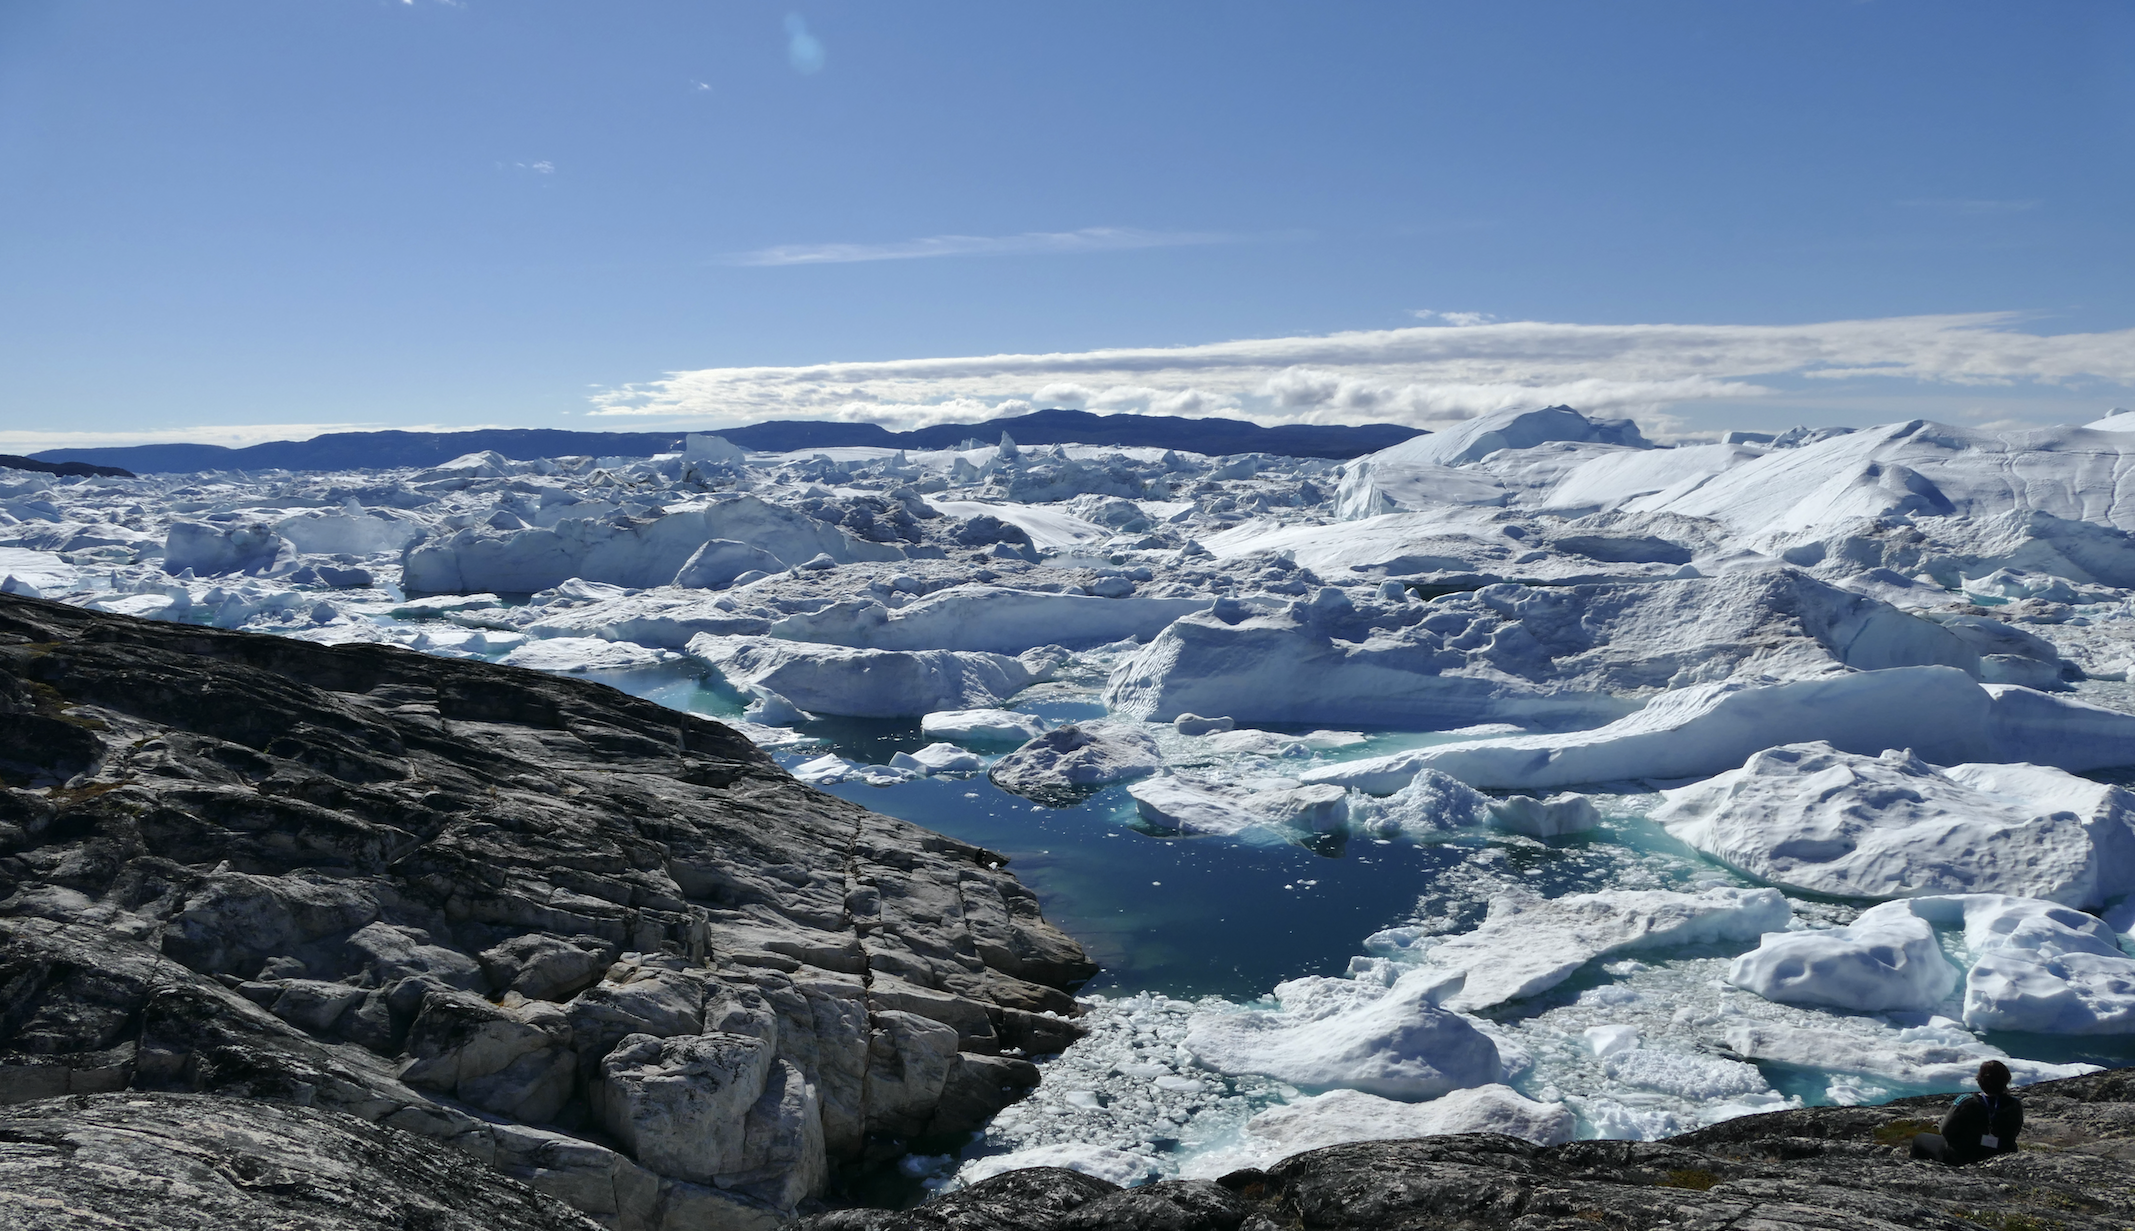 View of Jakobshaven Ice Fiord, pool of water in the centre surrounded by ice and rock